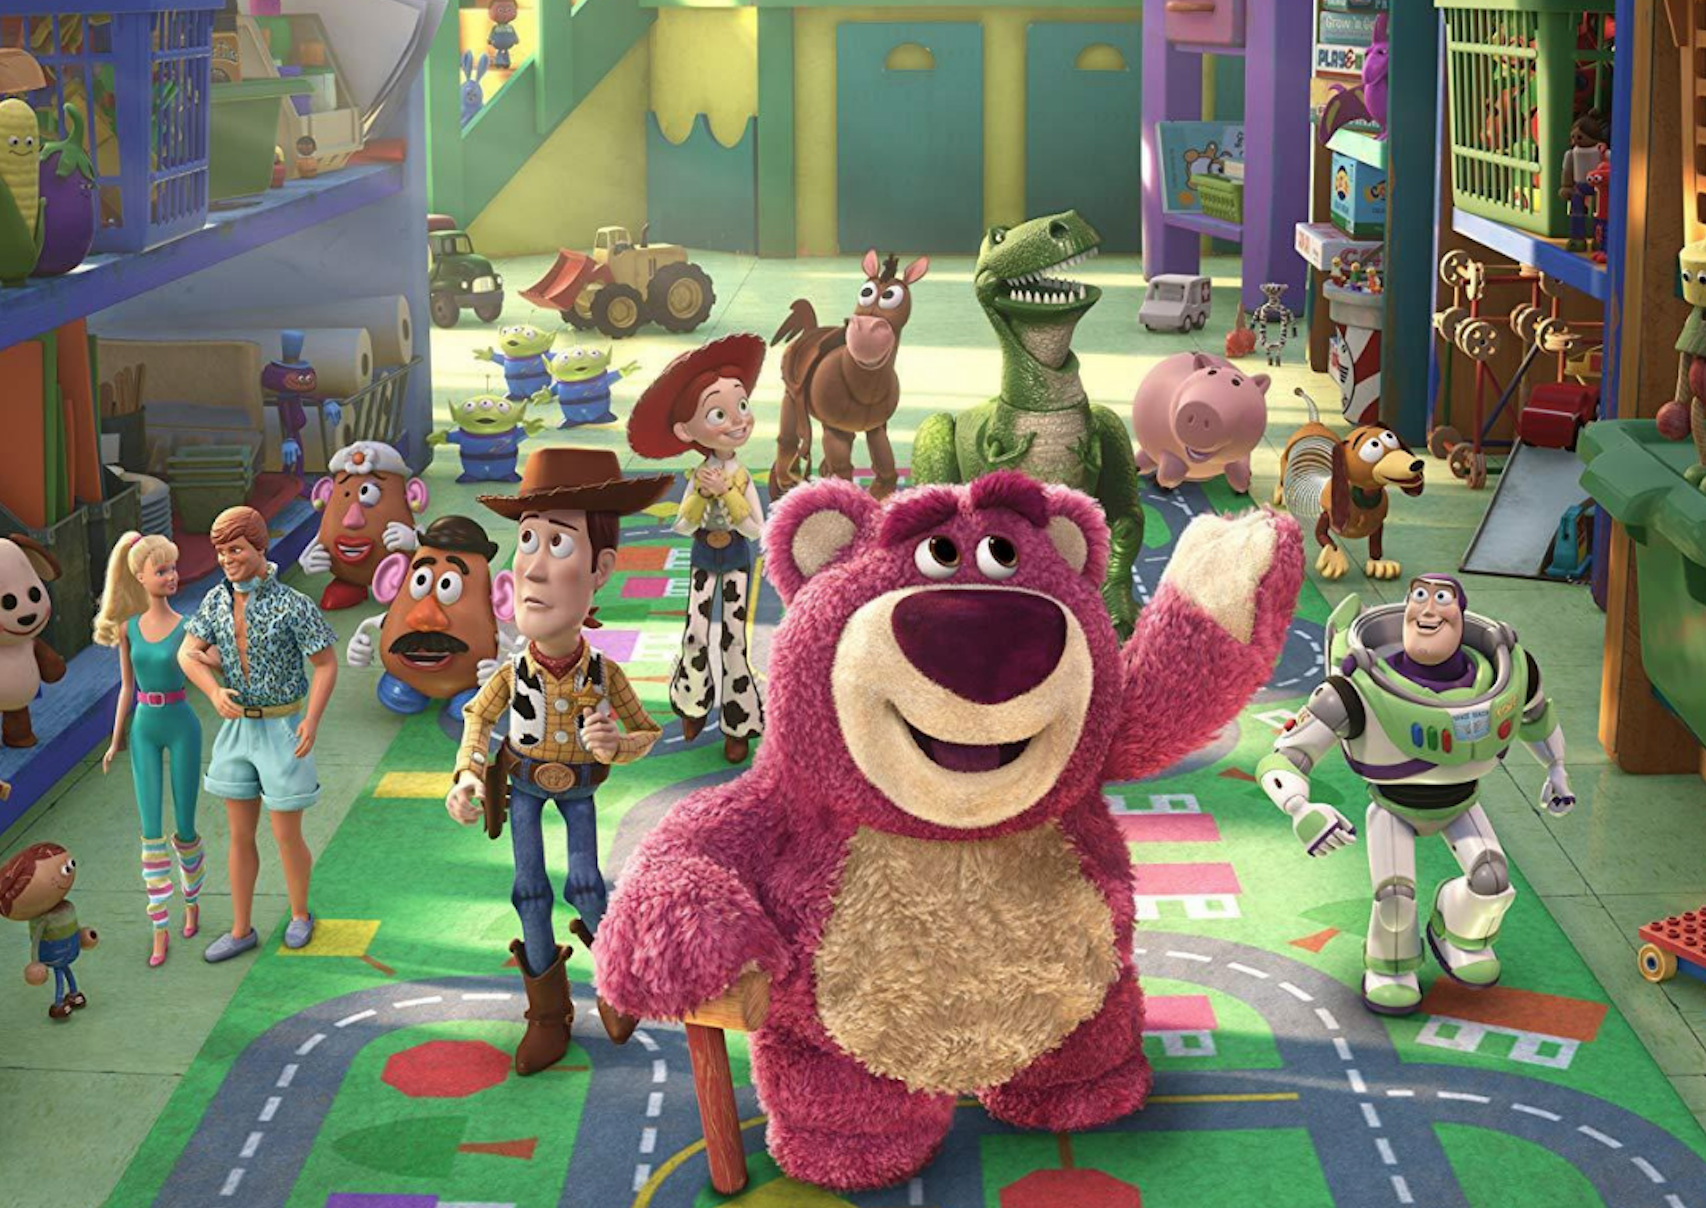 Animated still with characters from Toy Story 3.